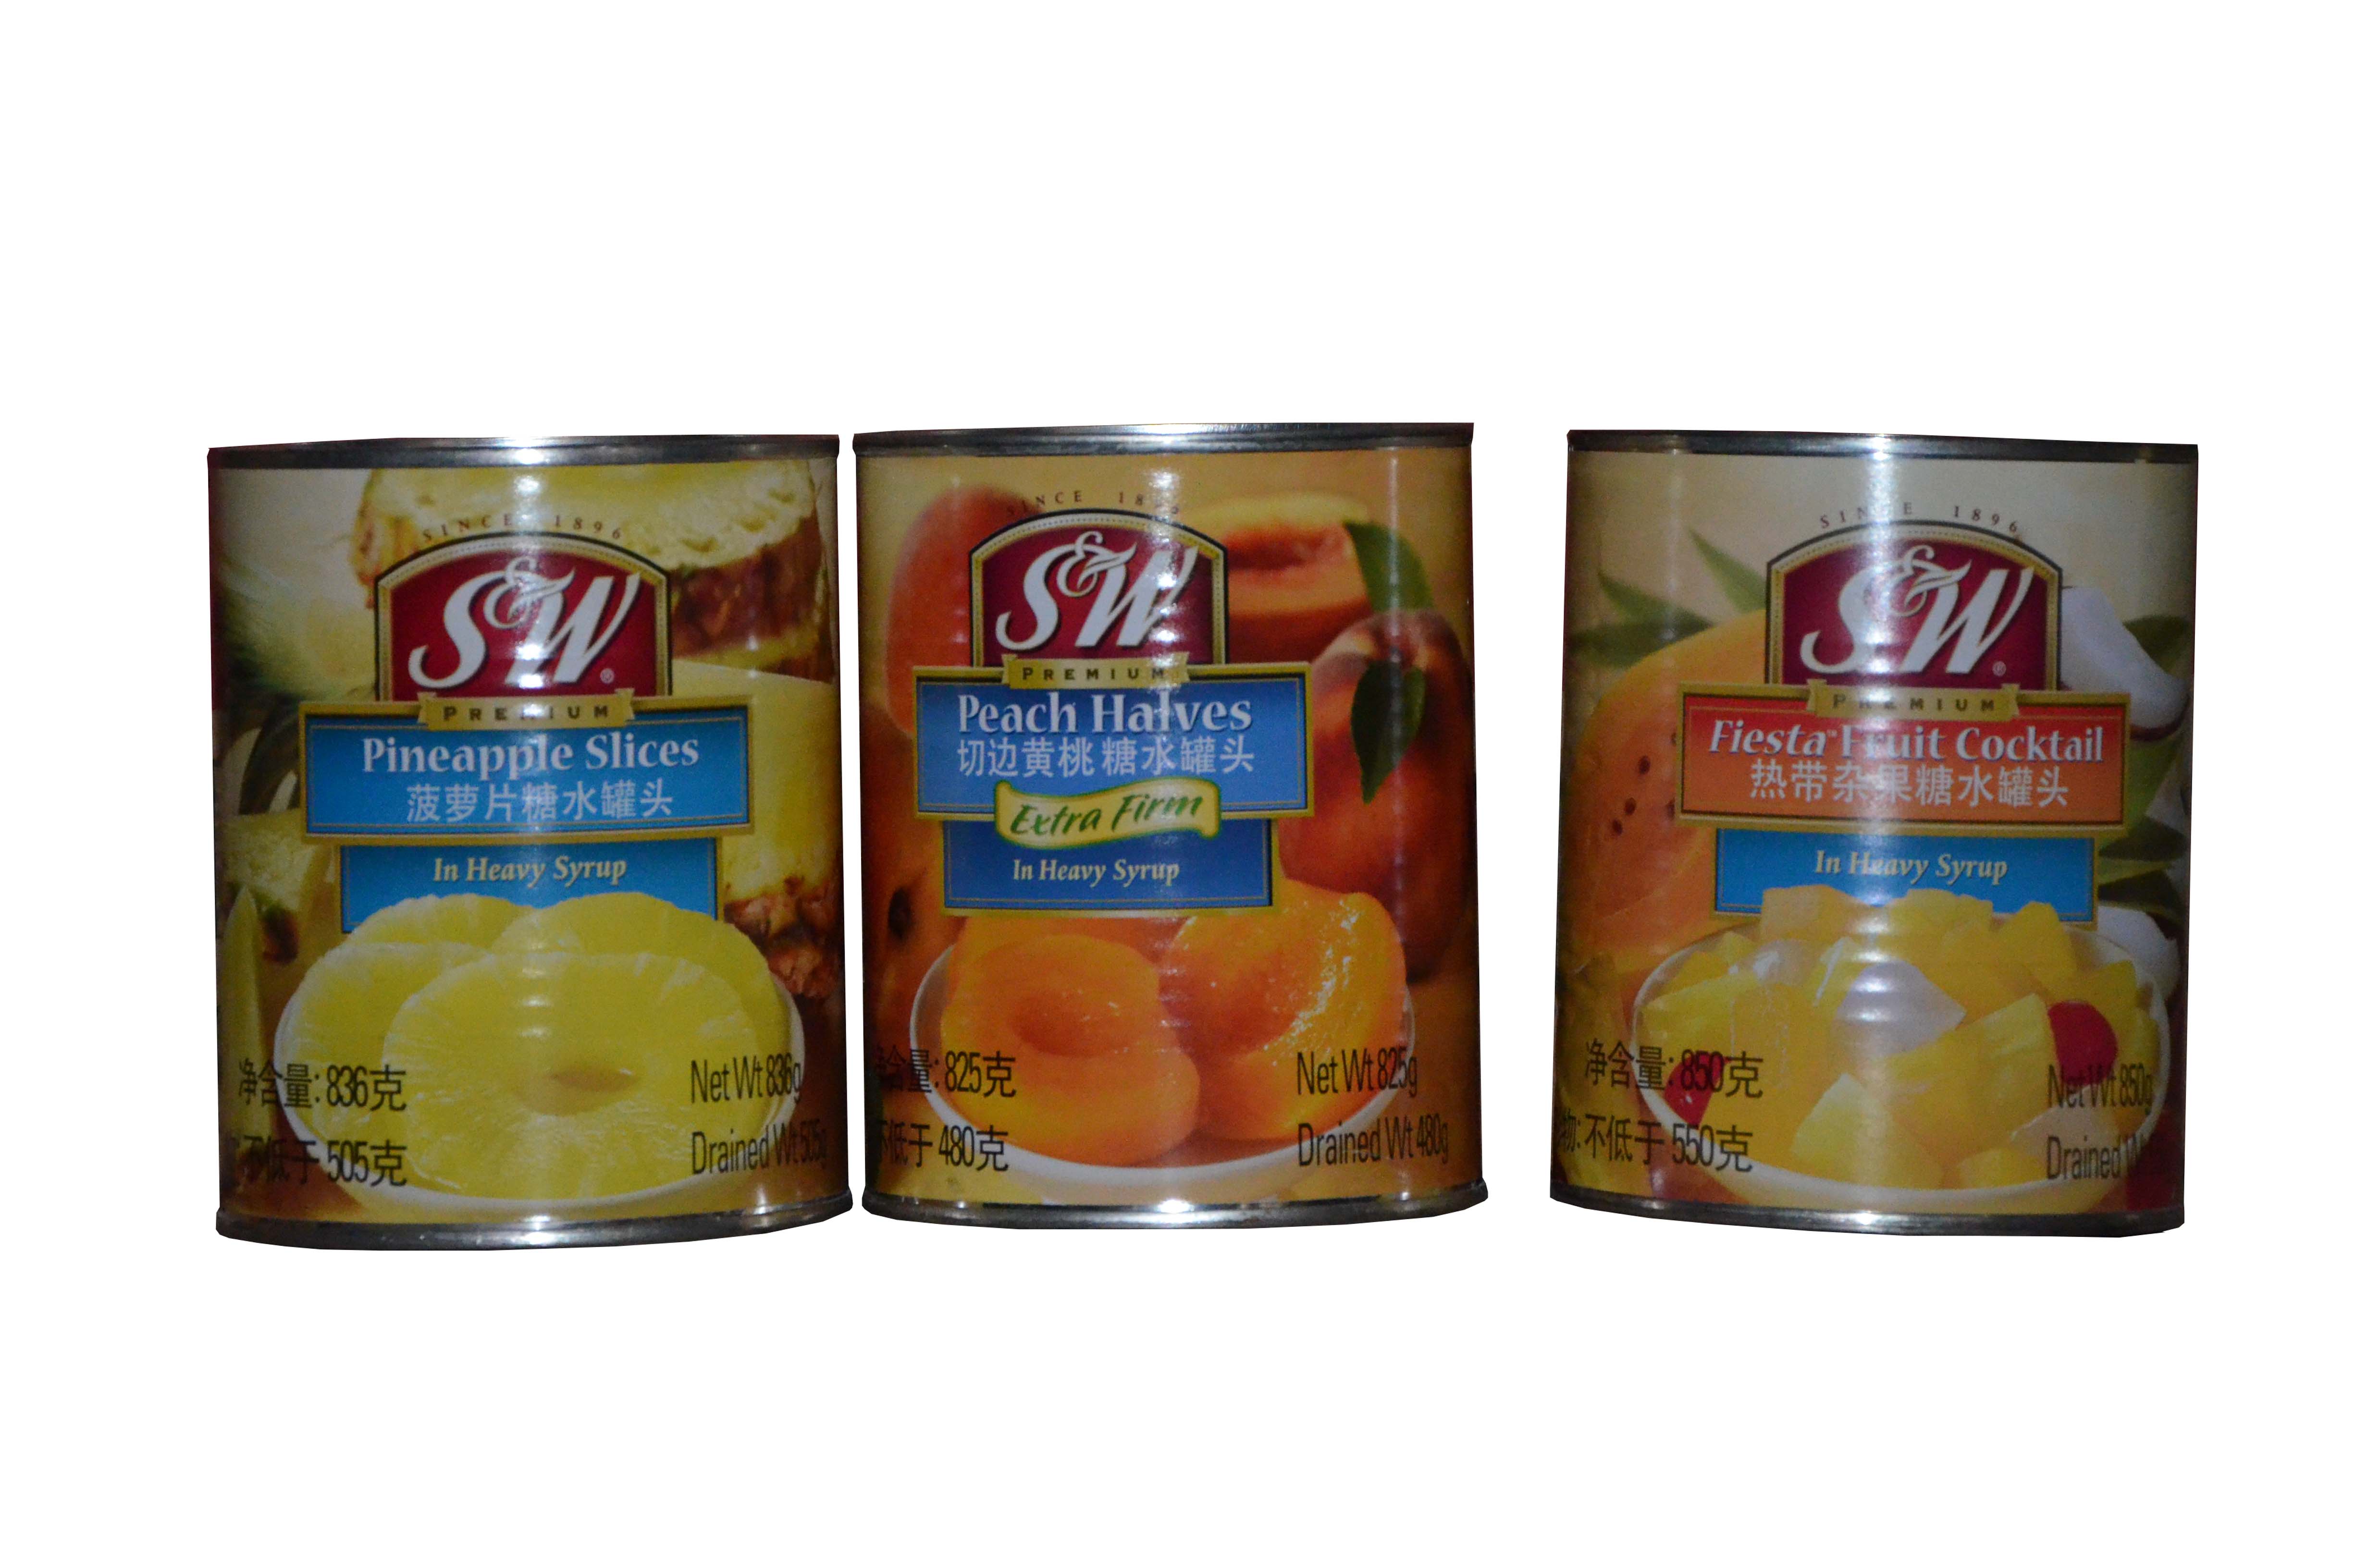 S & W canned